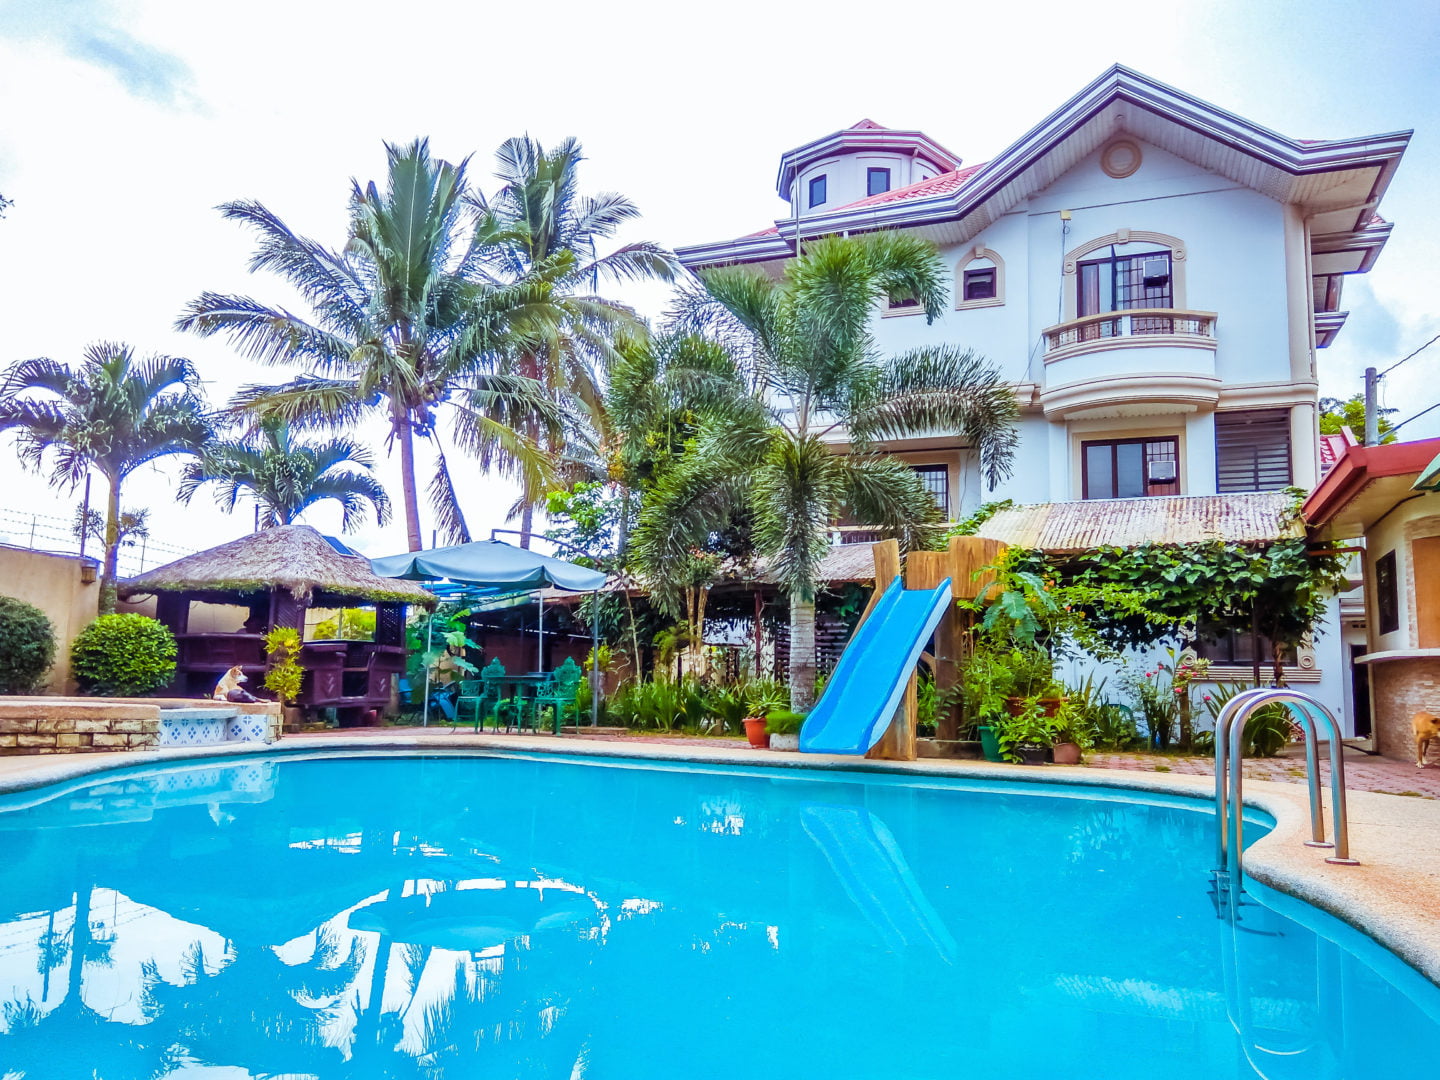 Tagaytay Farmhills: One Heck of a Staycation at a Vacation House in Tagaytay!